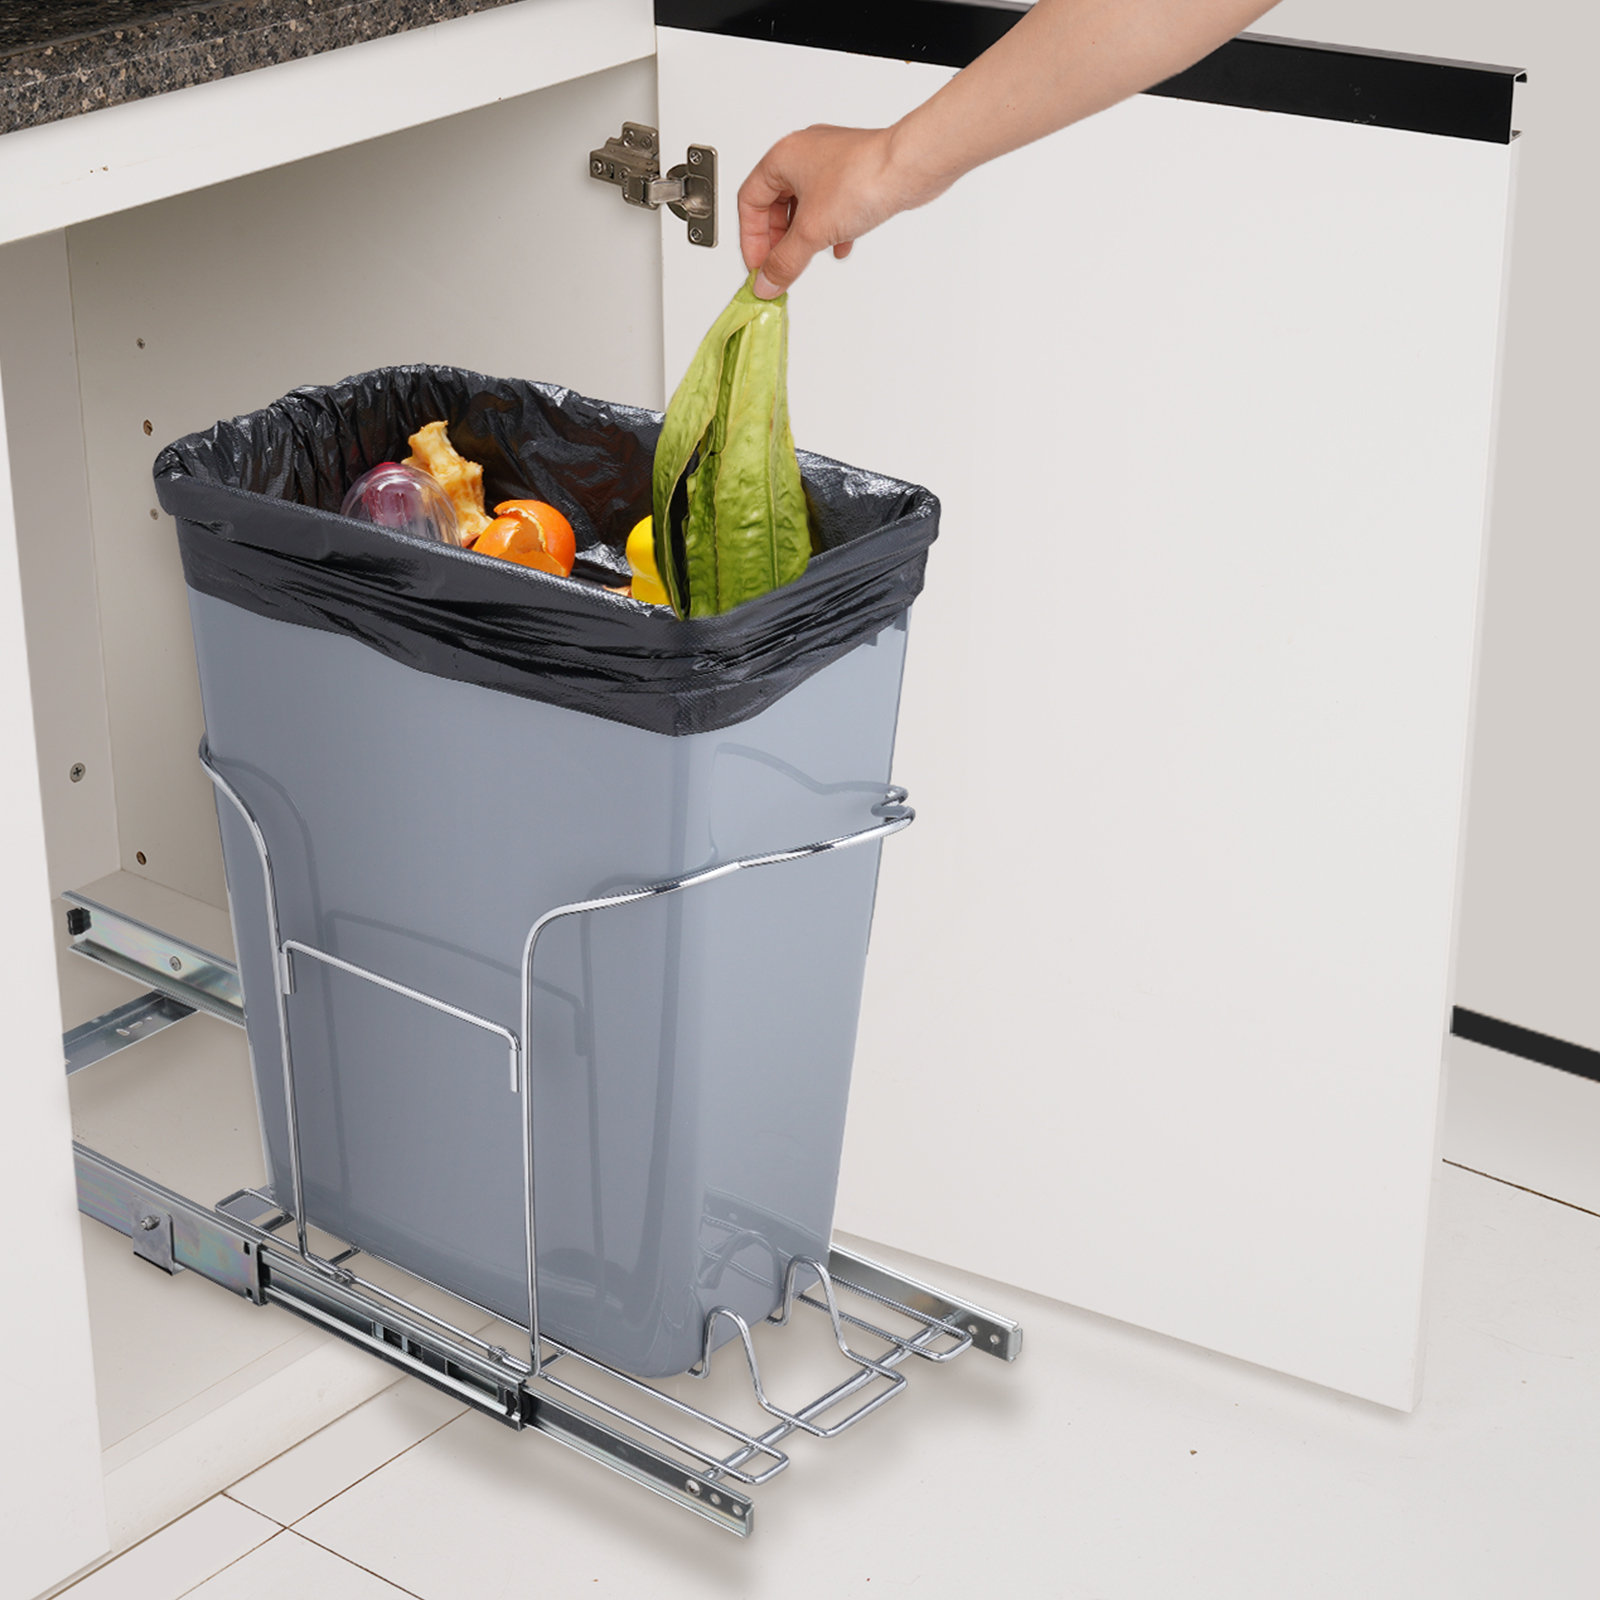 VEVOR Pull-Out Trash Can, 29L Single Bin, Under Mount Kitchen Waste  Container with Slide, Handle,Kit